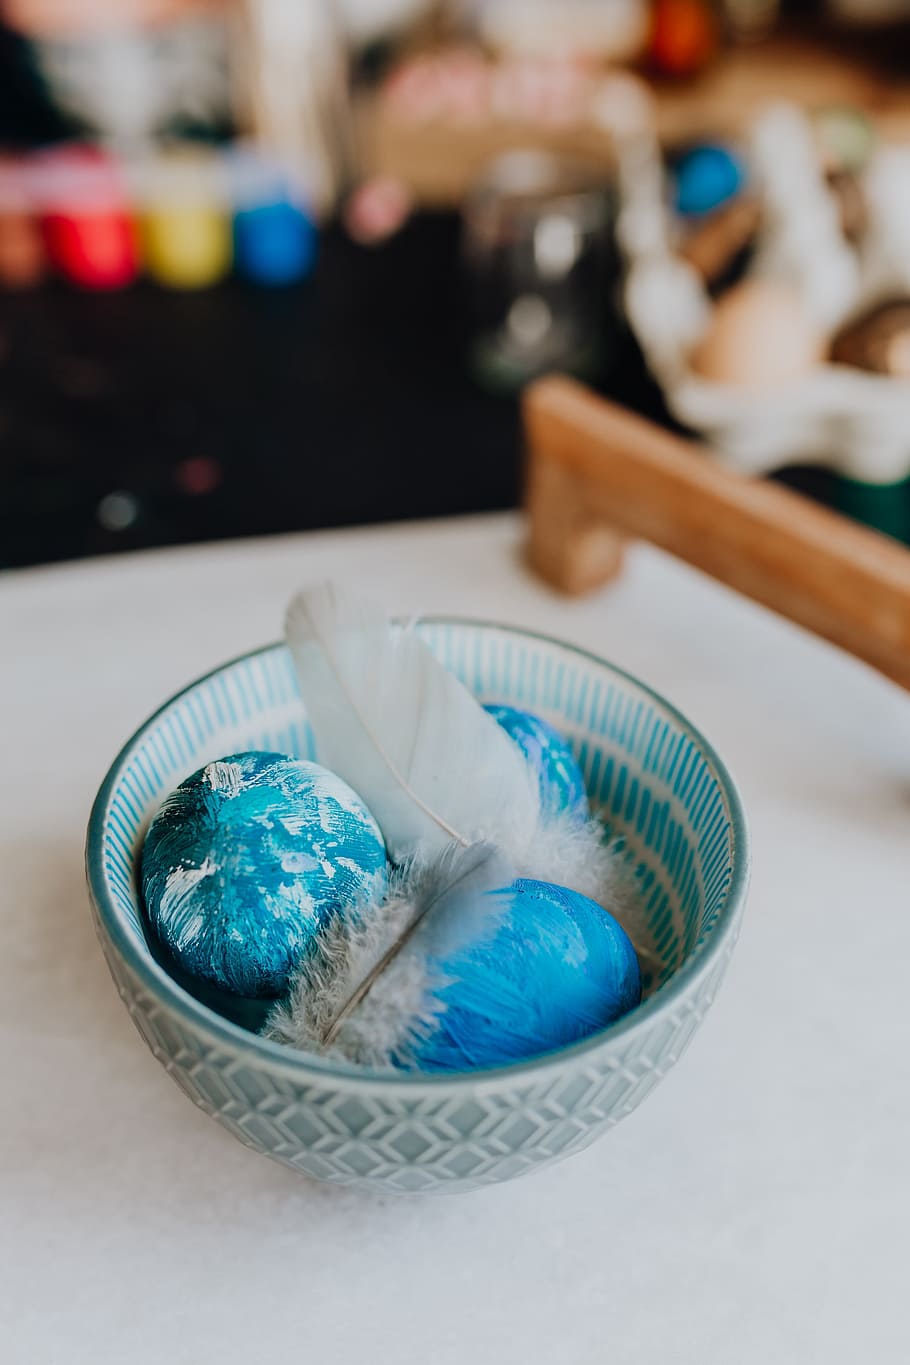 Blue Easter Eggs, colorful, painted, focus on foreground, table